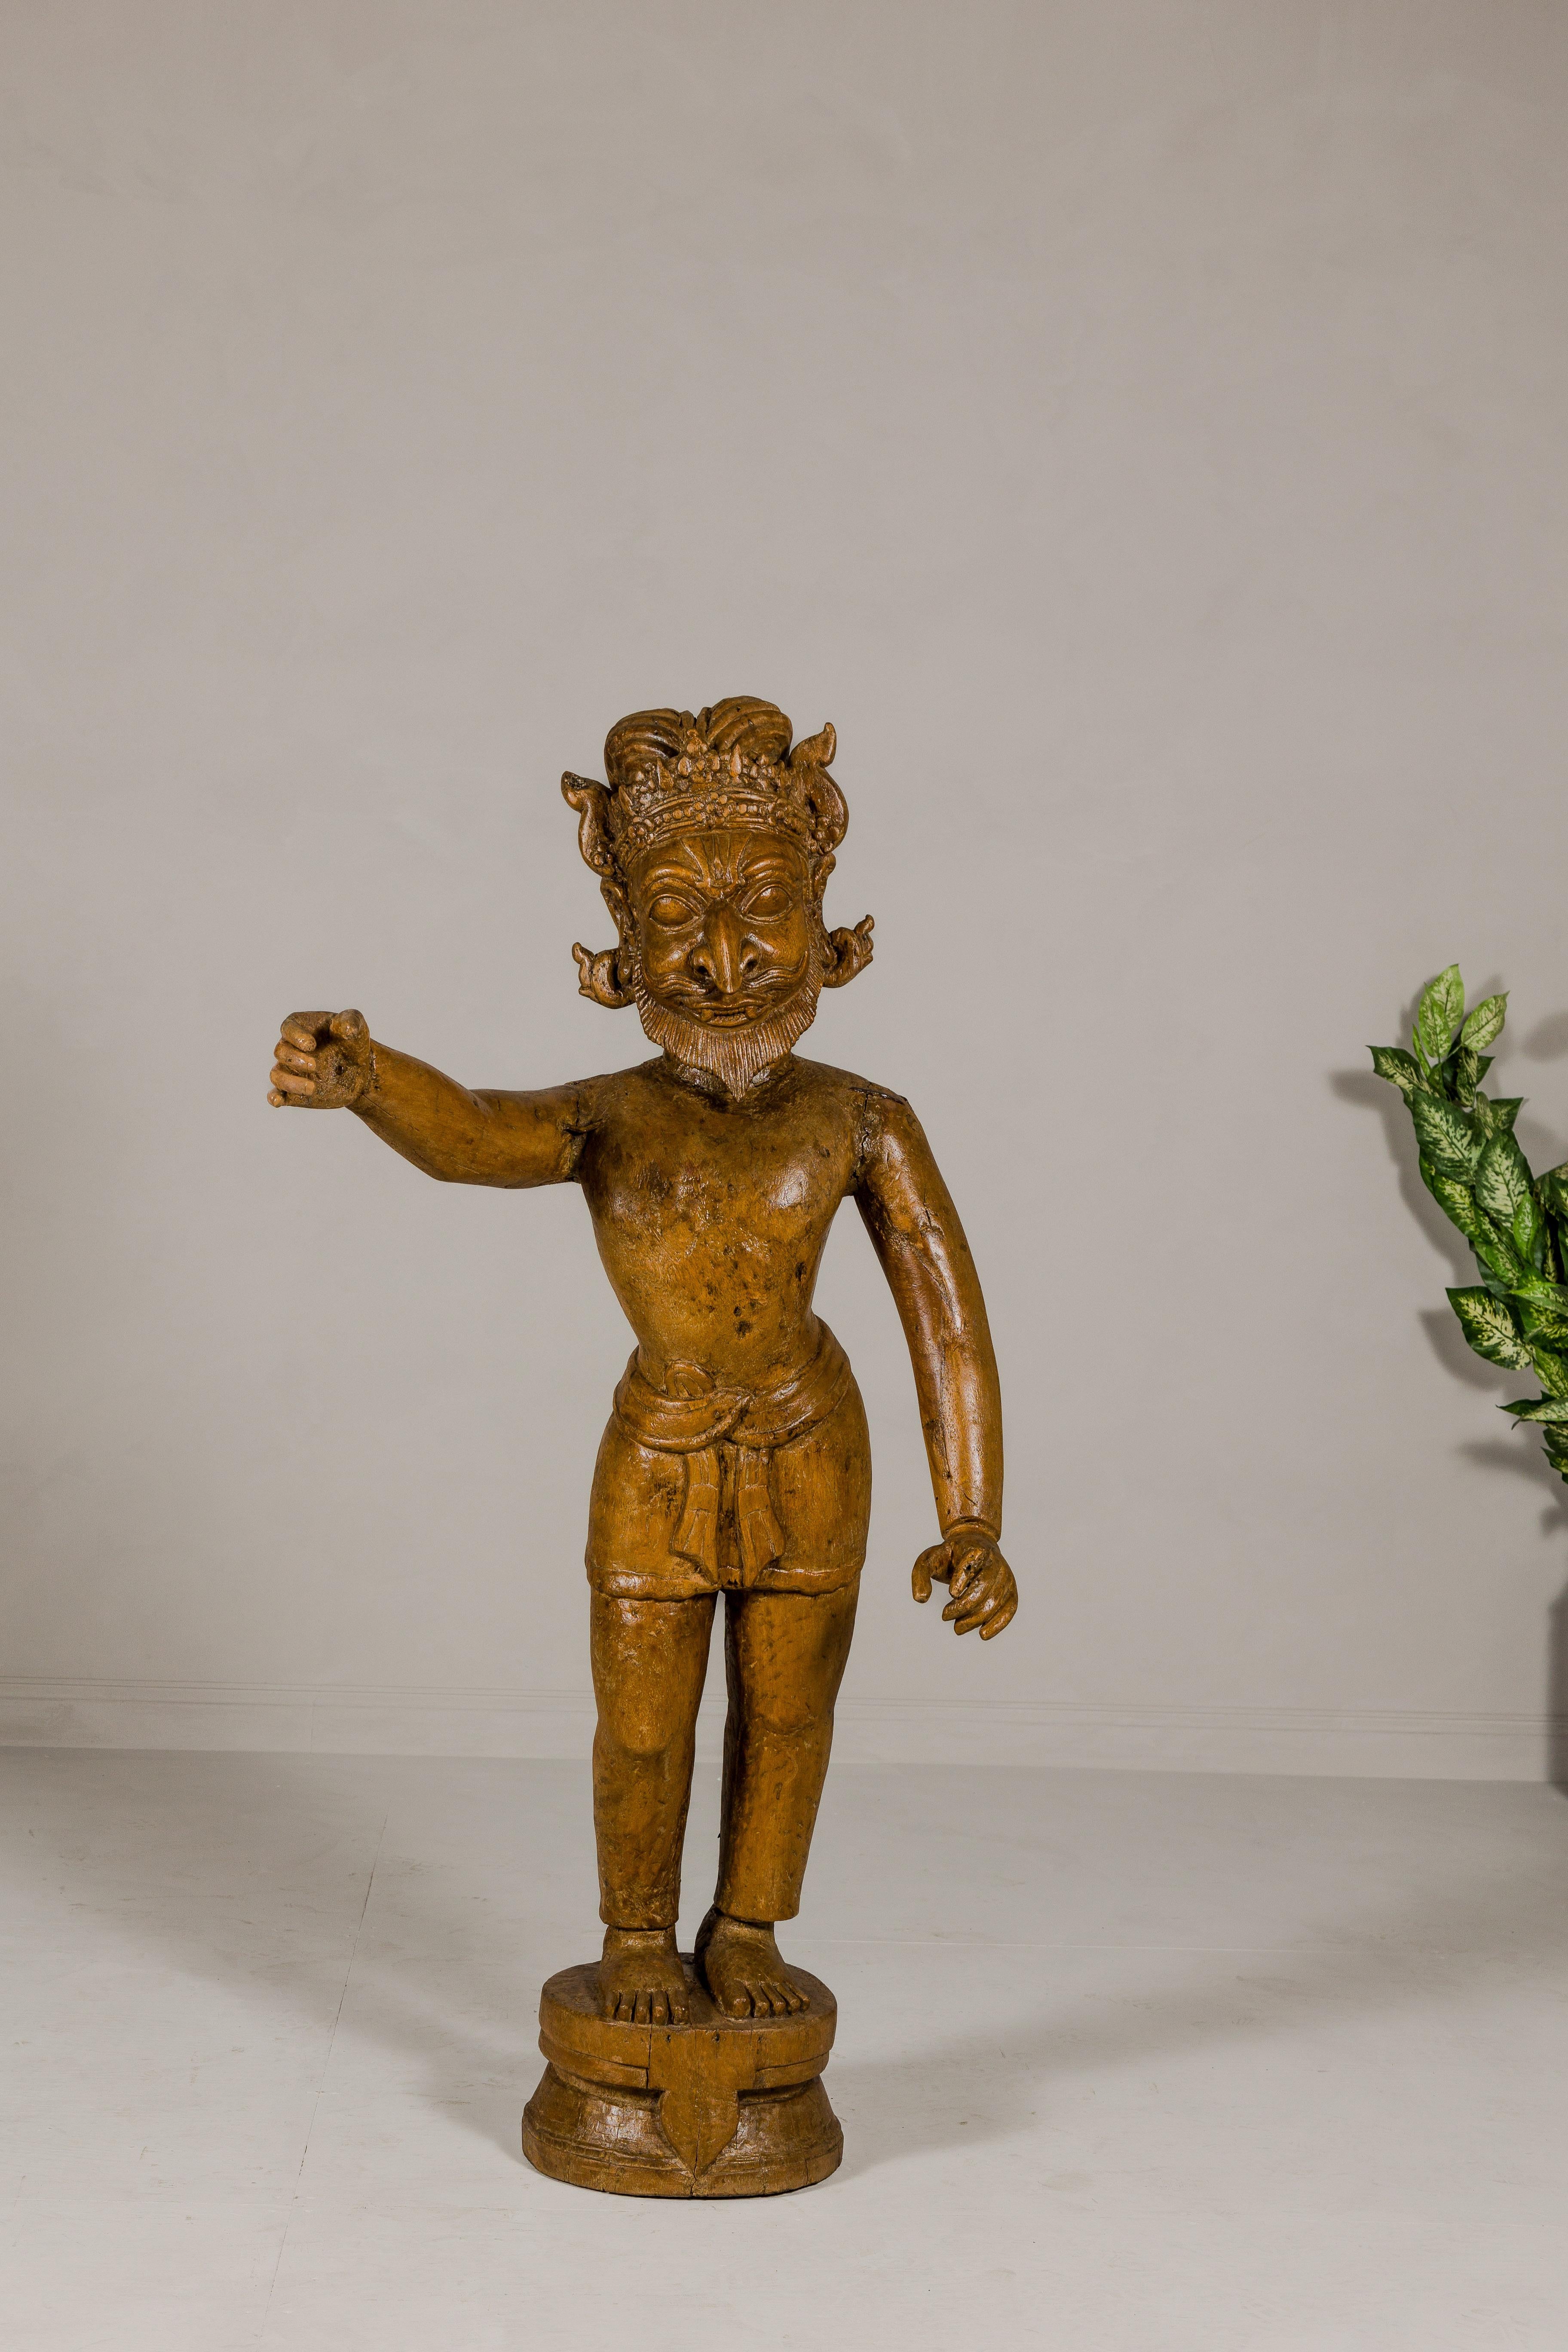 A large early 1900s wooden Mogul standing figure with extended arm, from India. This wooden Mogul figure, originating from early 20th-century India, is a remarkable piece of artistry and cultural history. This statue portrays a distinguished figure,